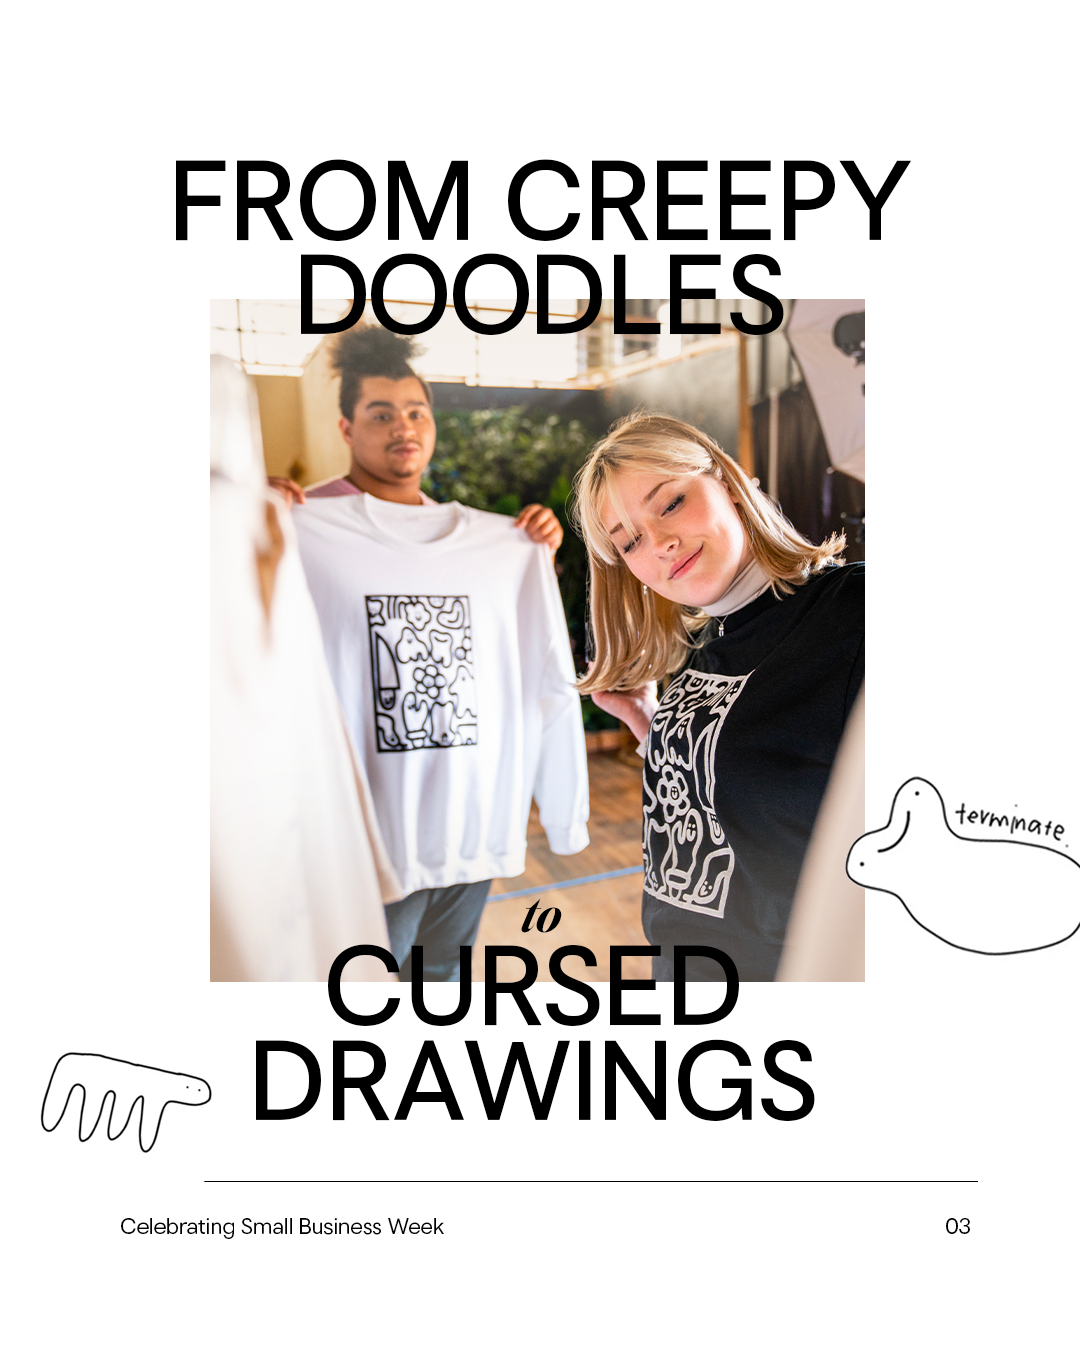 From Creepy Doodles to Cursed drawings.